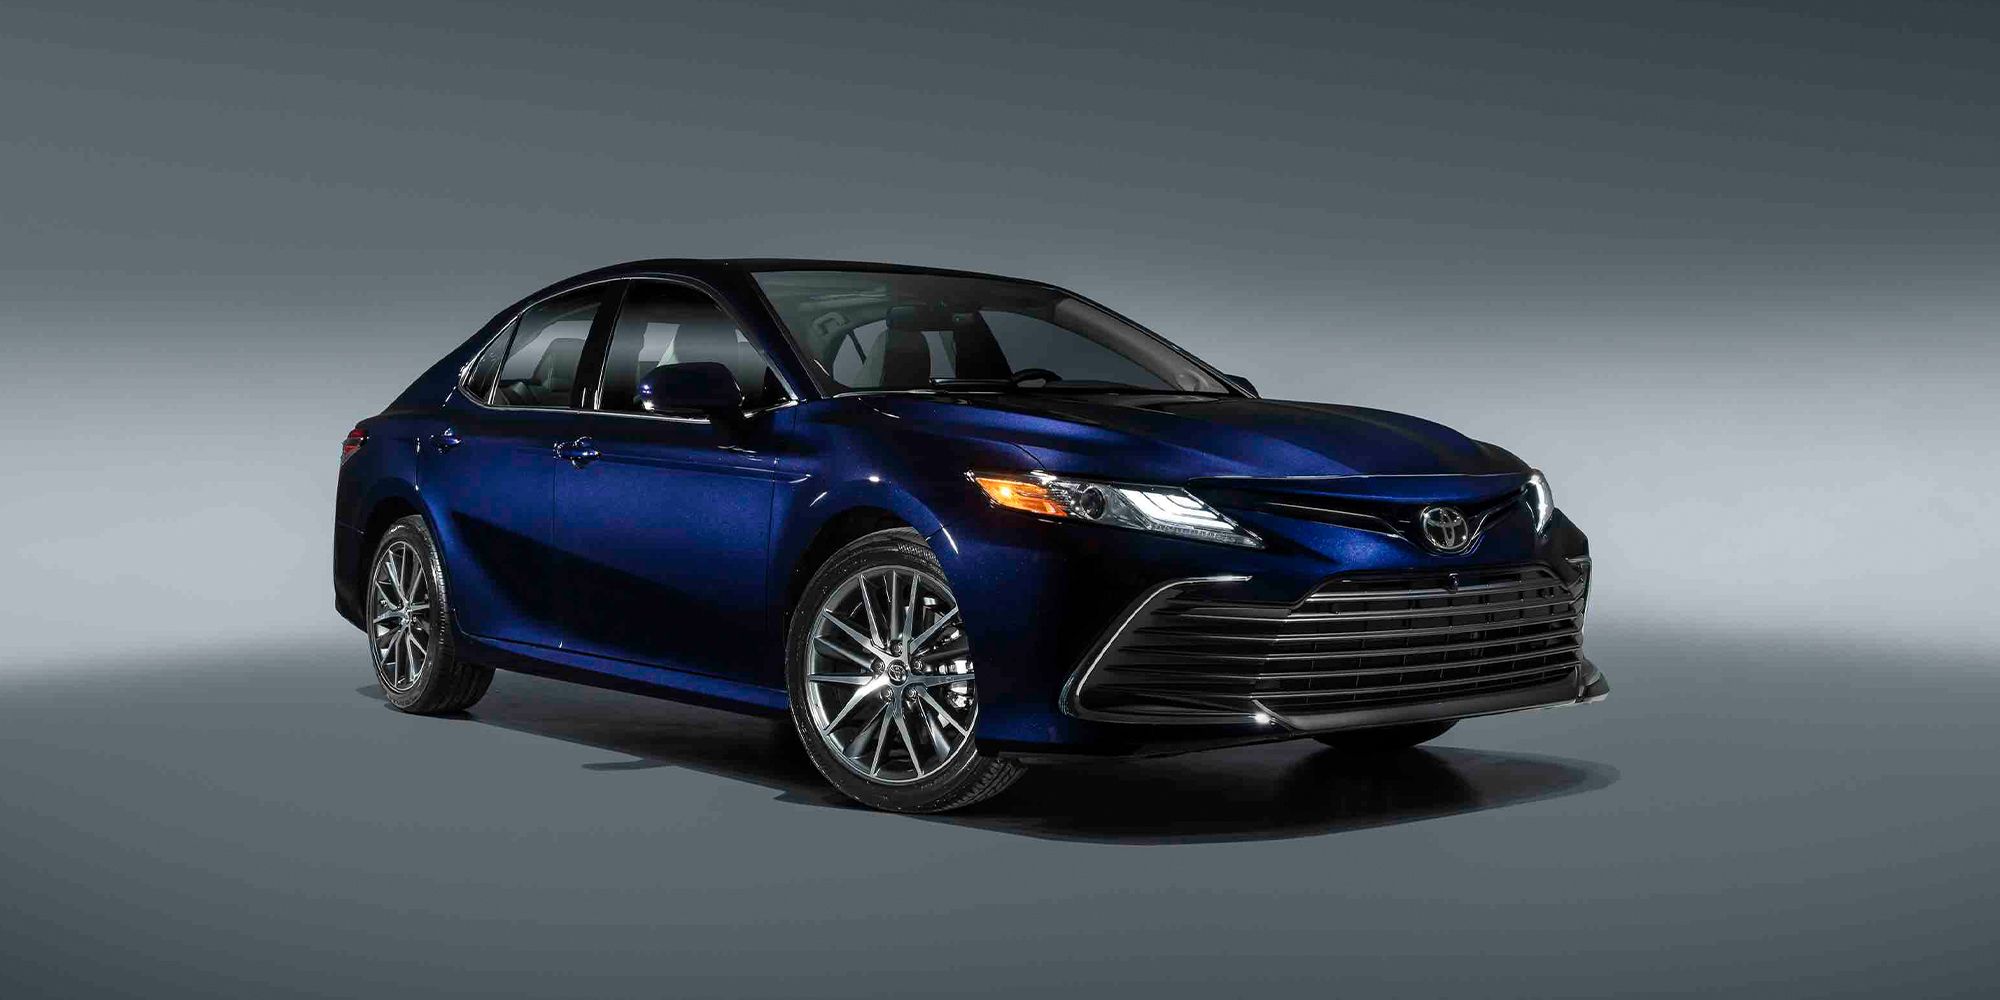 Front 3/4 view of a blue Camry, grey background